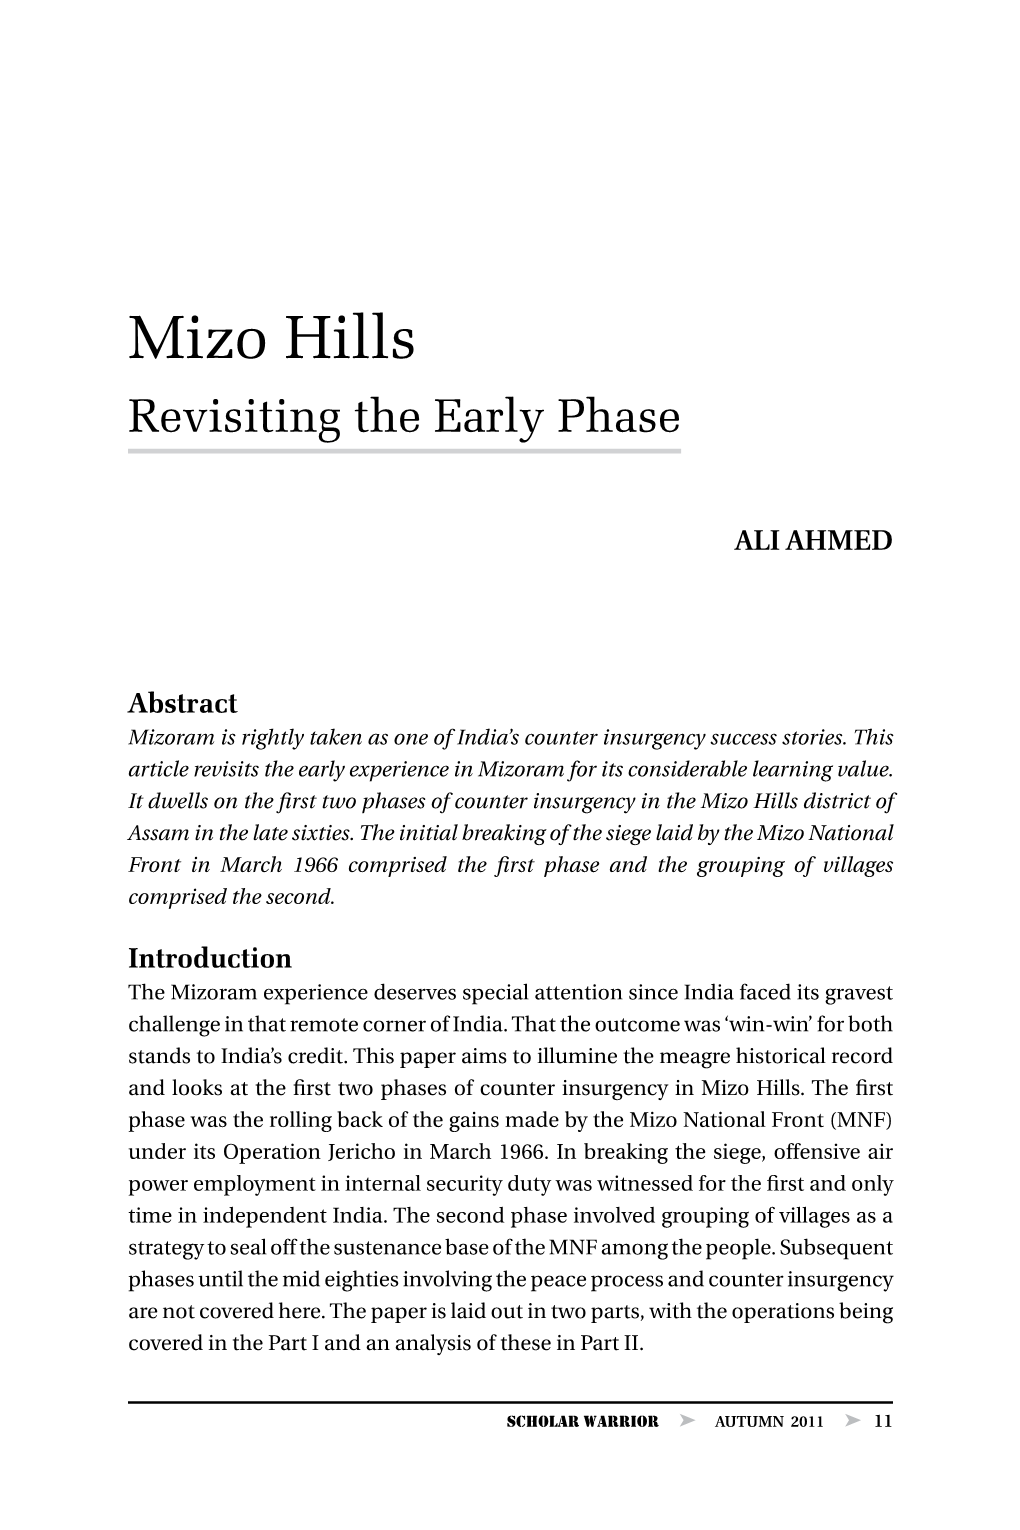 Mizo Hills Revisiting the Early Phase